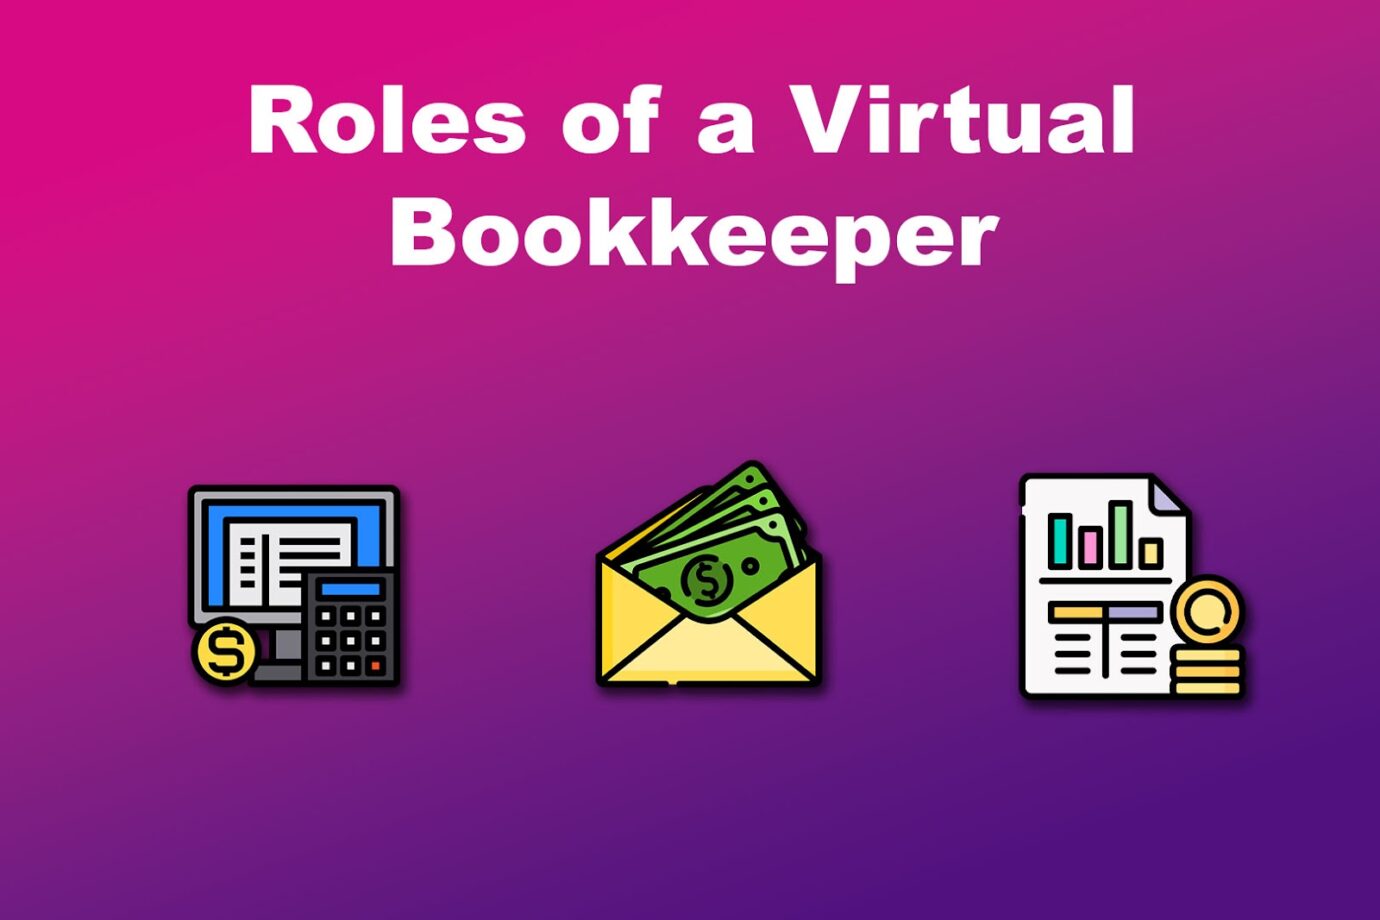 Roles of a Virtual Bookkeeper